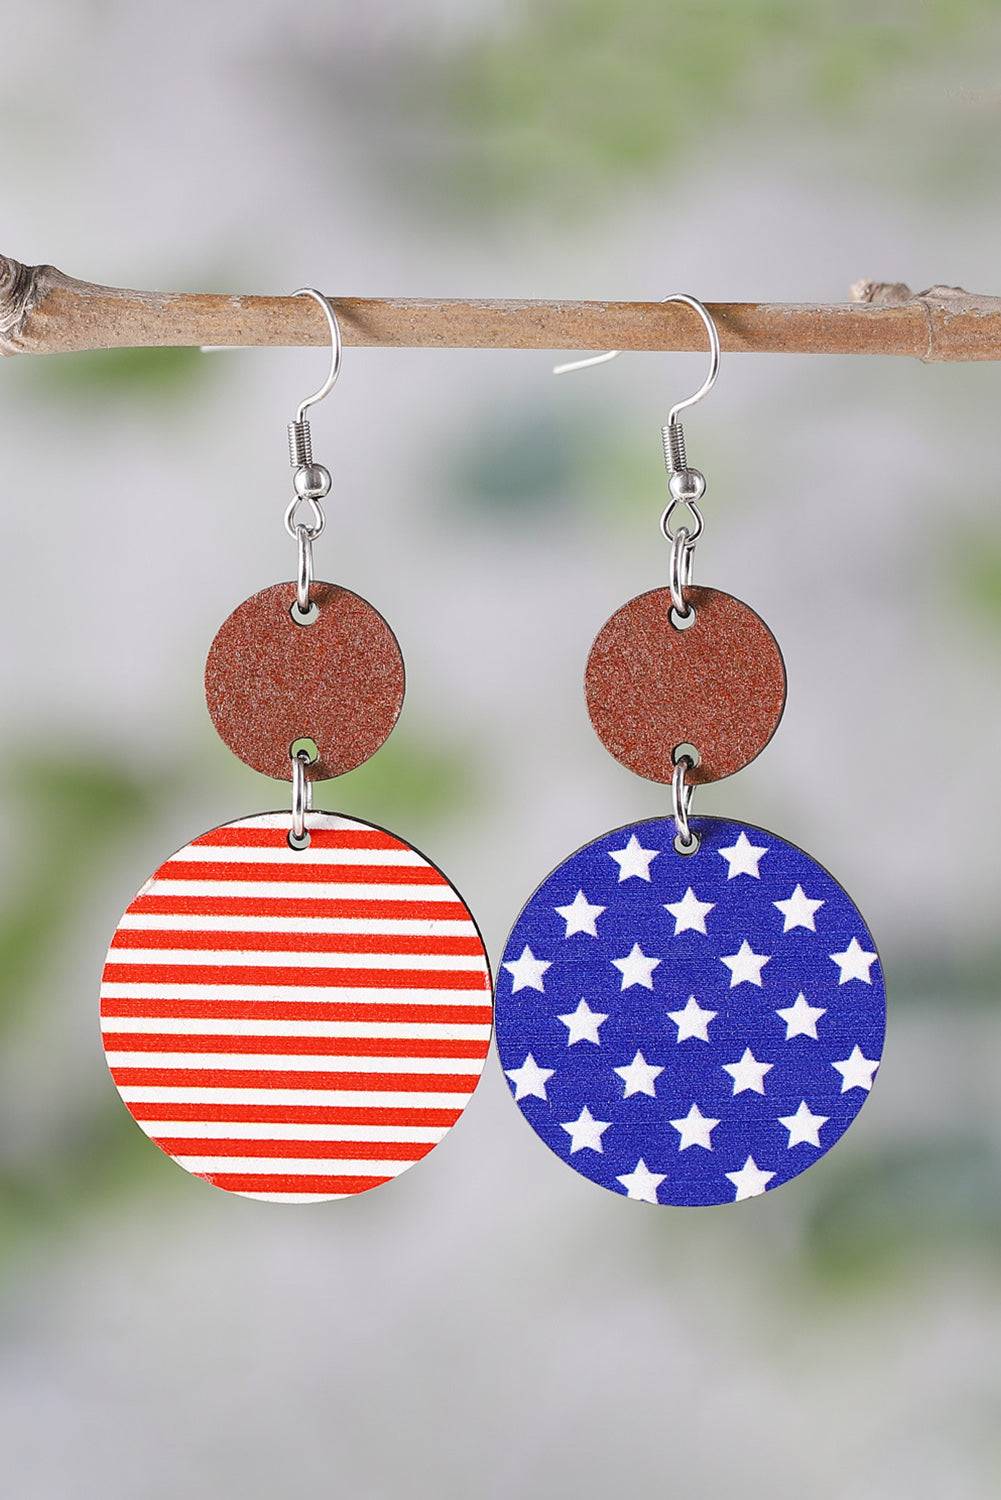 a pair of red, white and blue earrings hanging from a tree branch